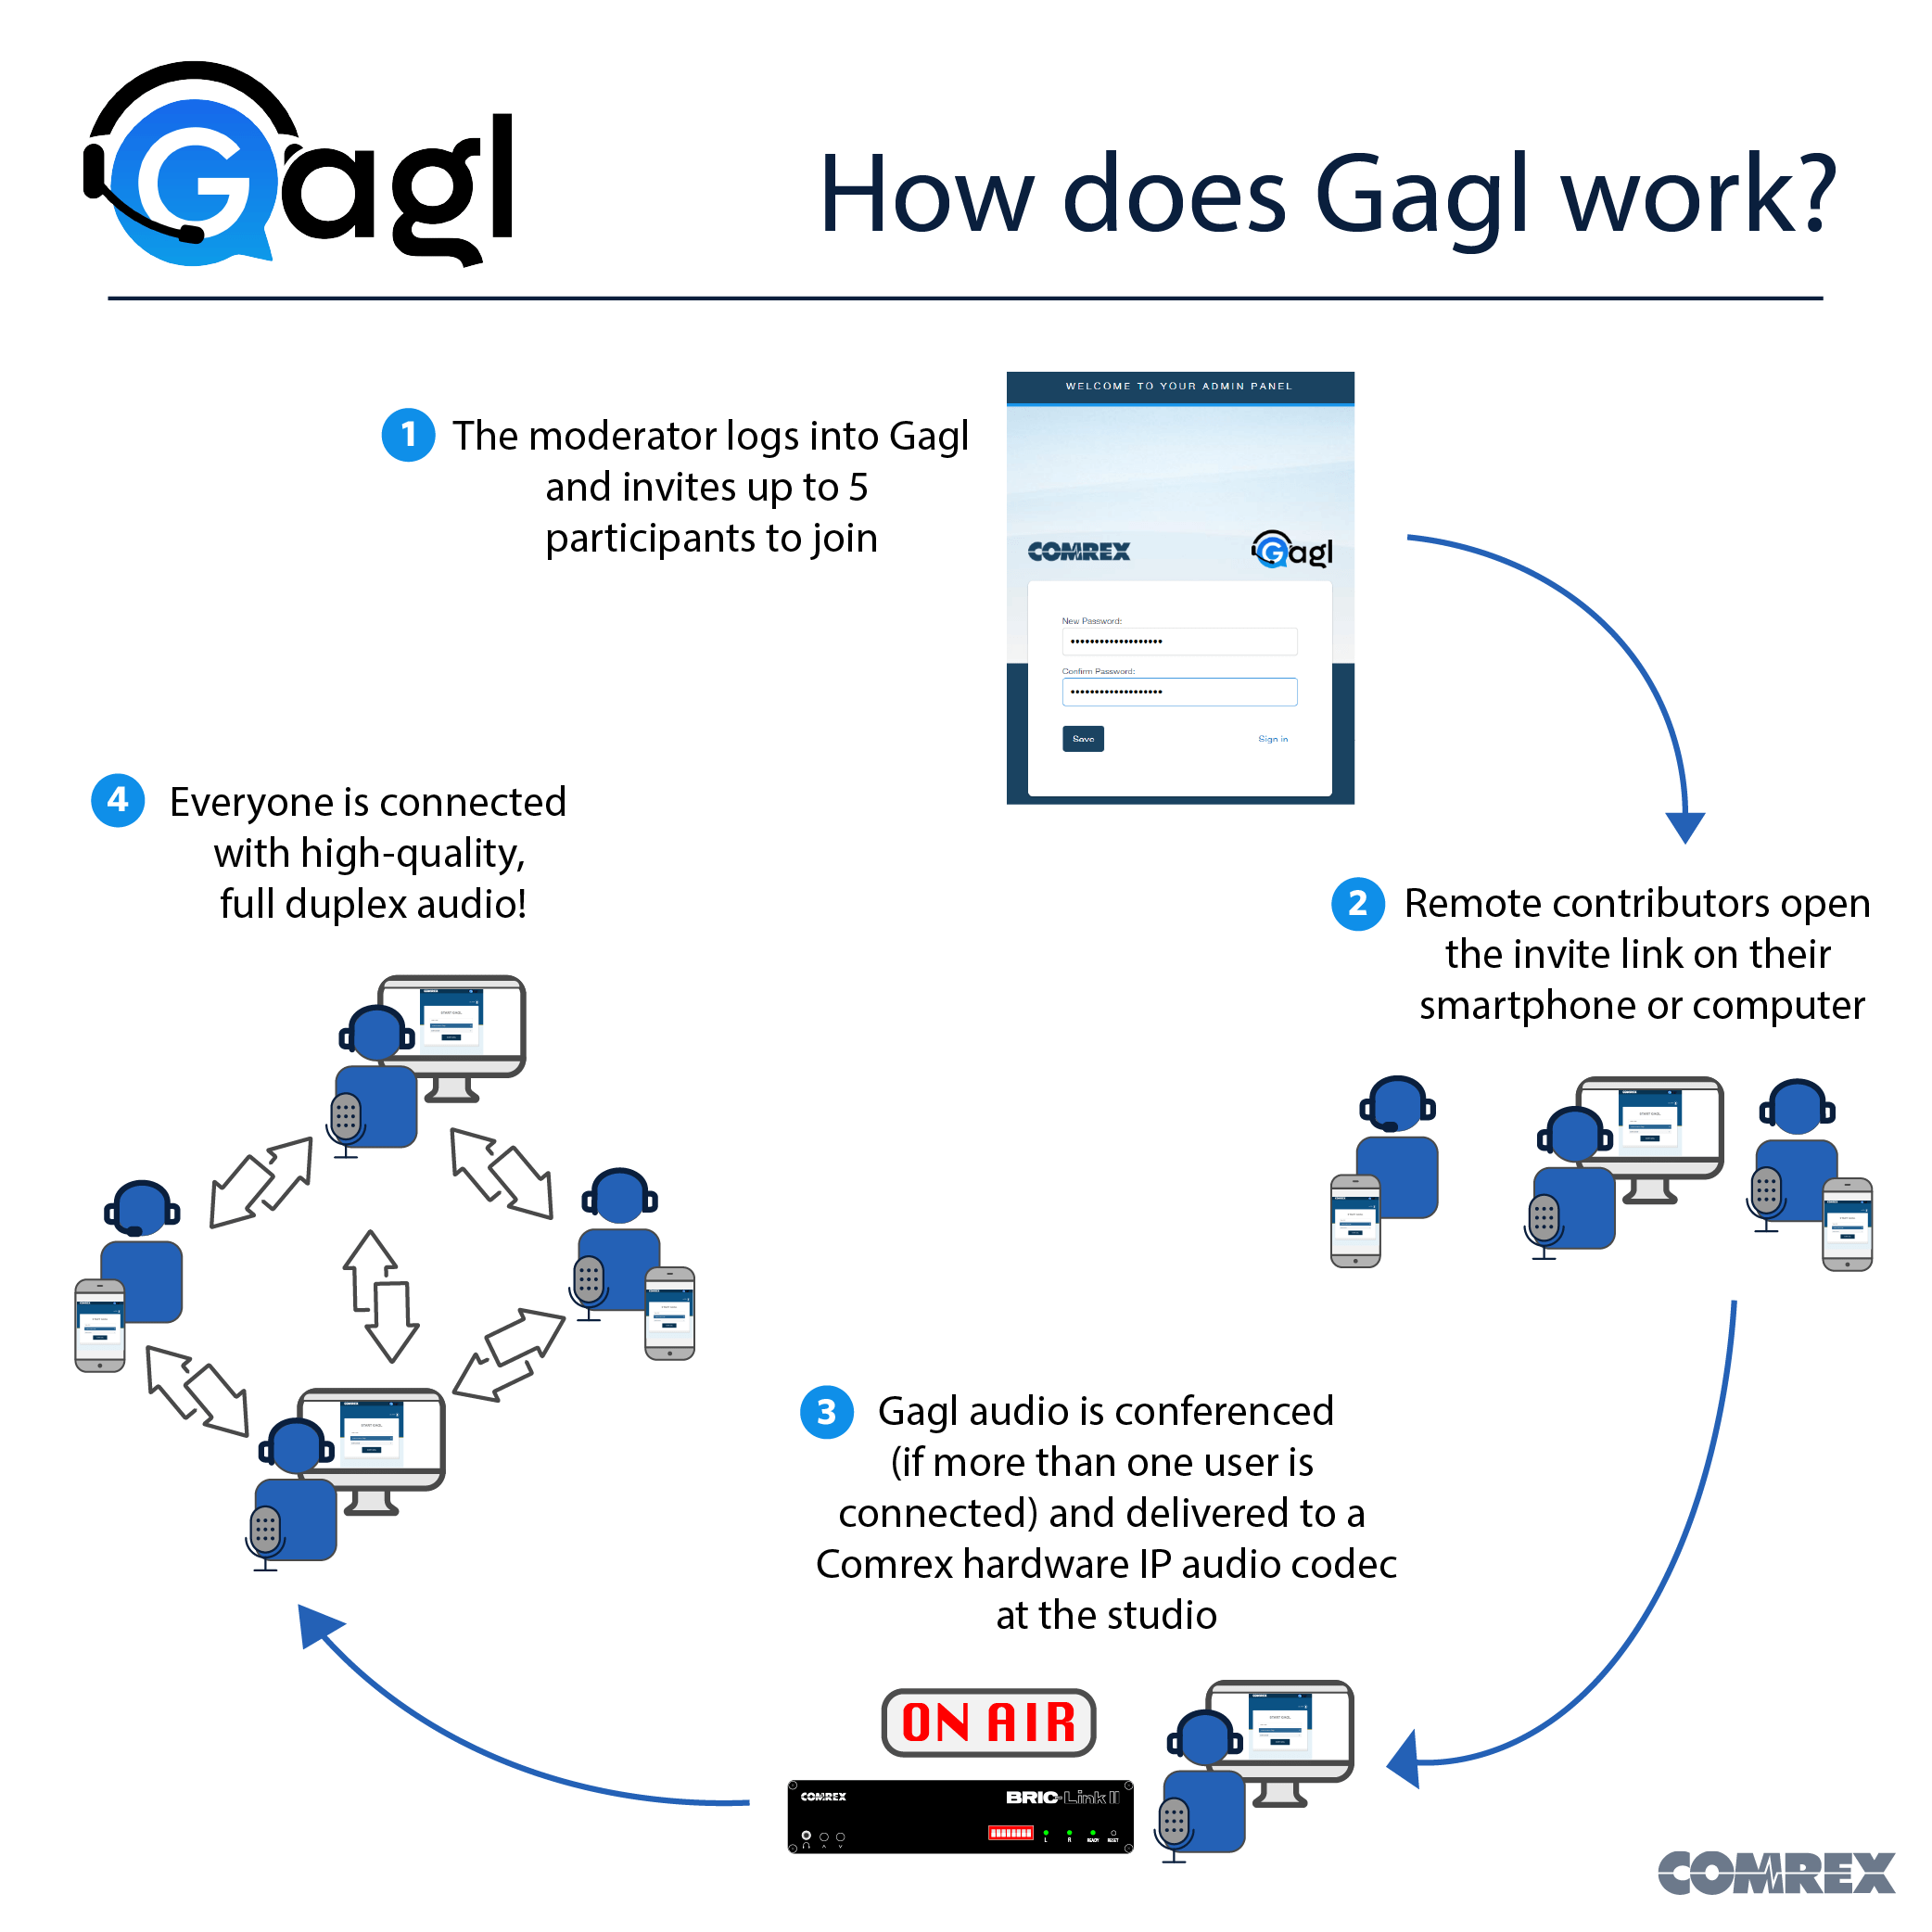 how does Gagl work diagagram